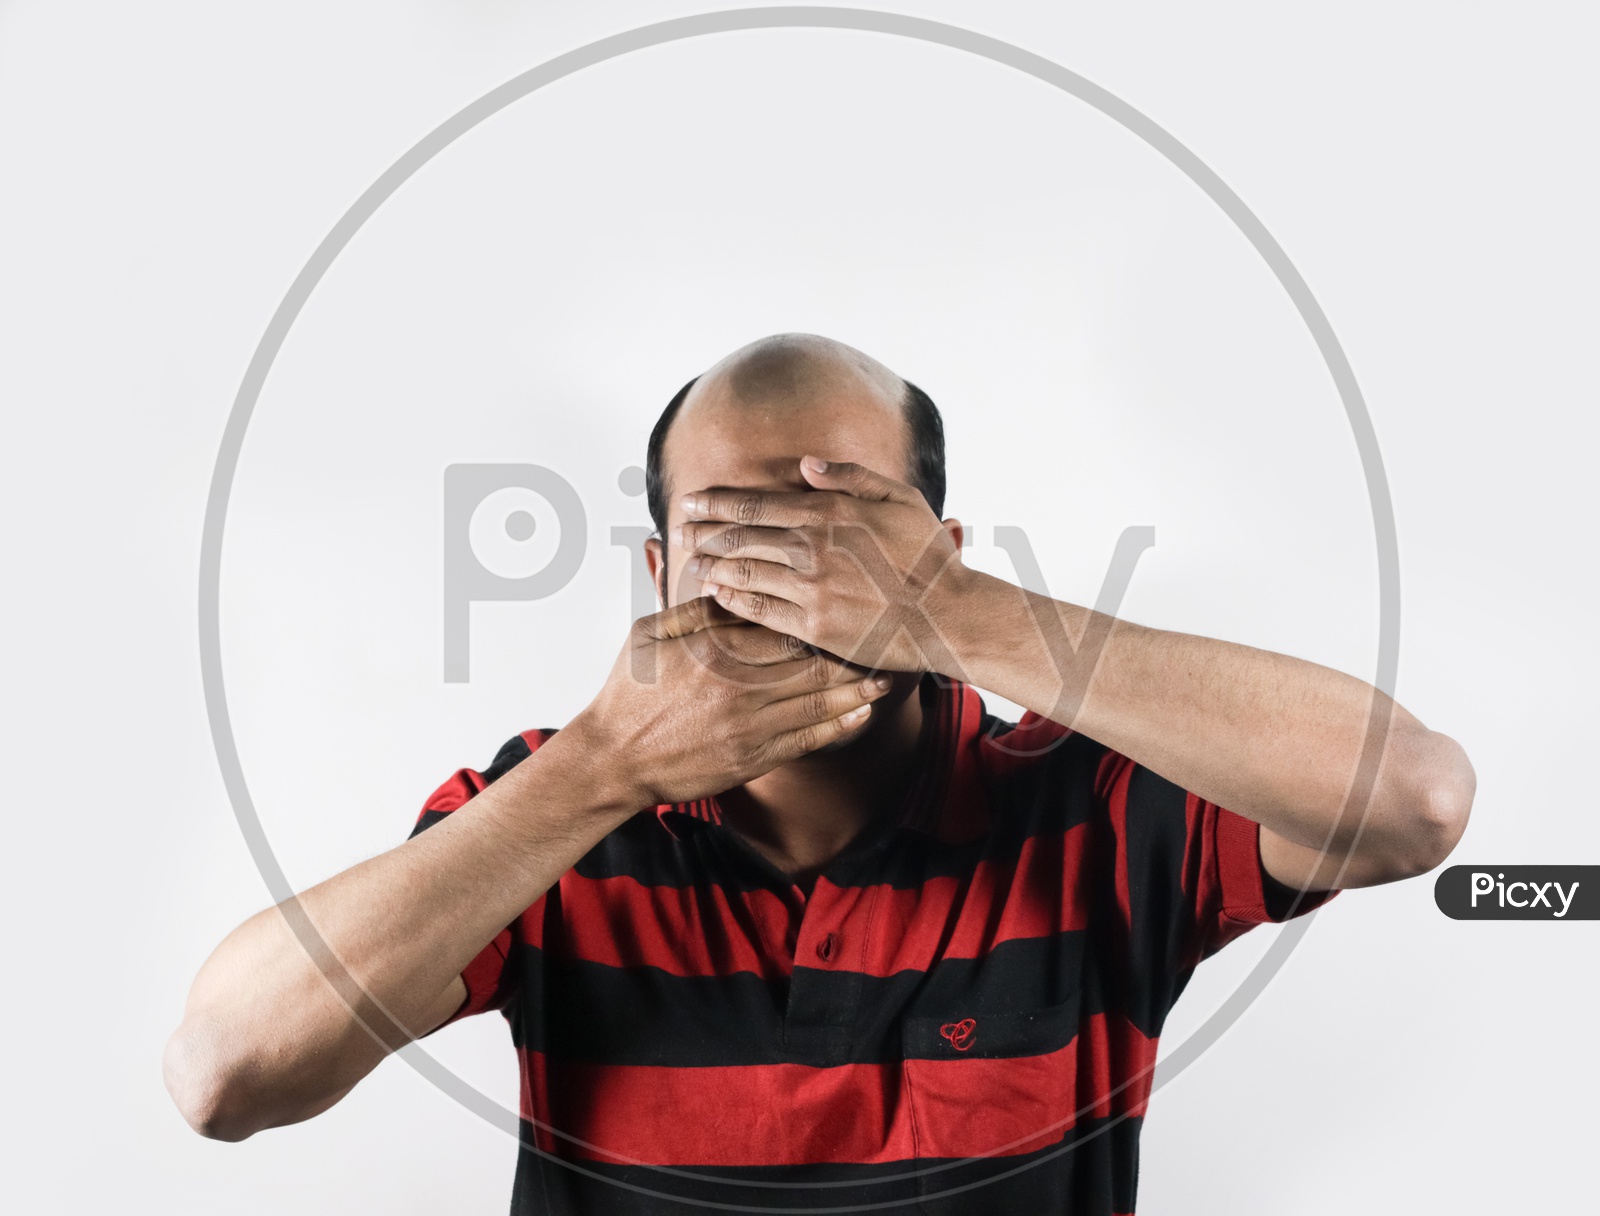 Bald Man Covering His Face In Shame In White Background With Space For Text